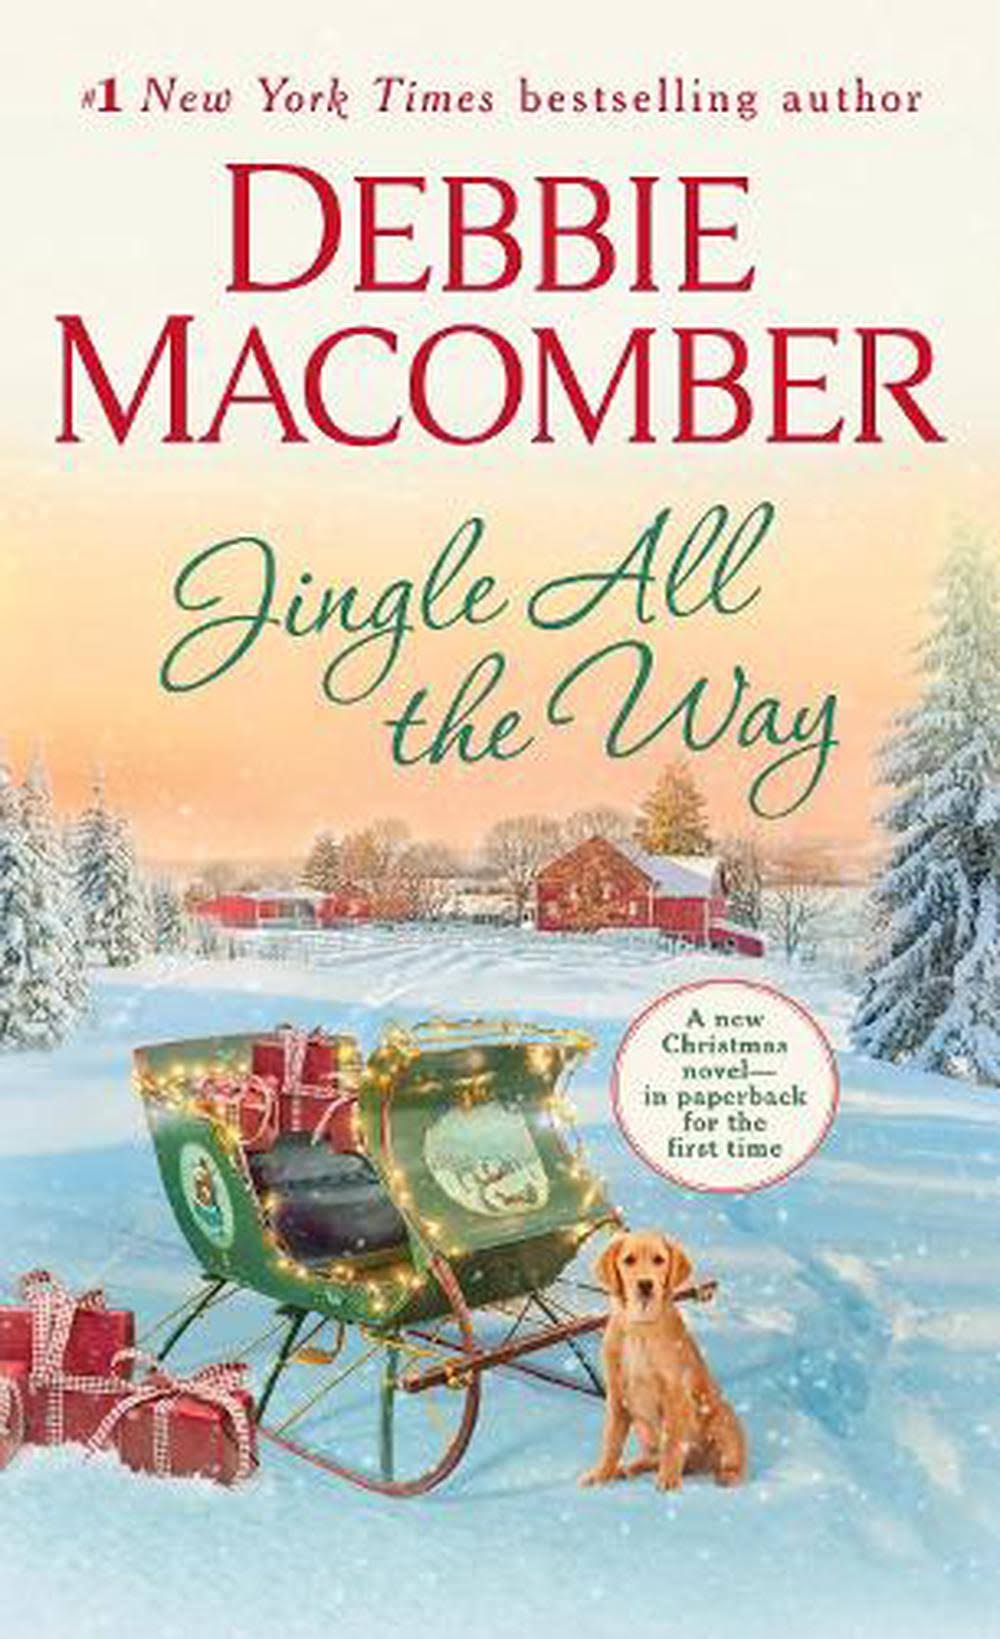 Jingle All The Way by Debbie Macomber